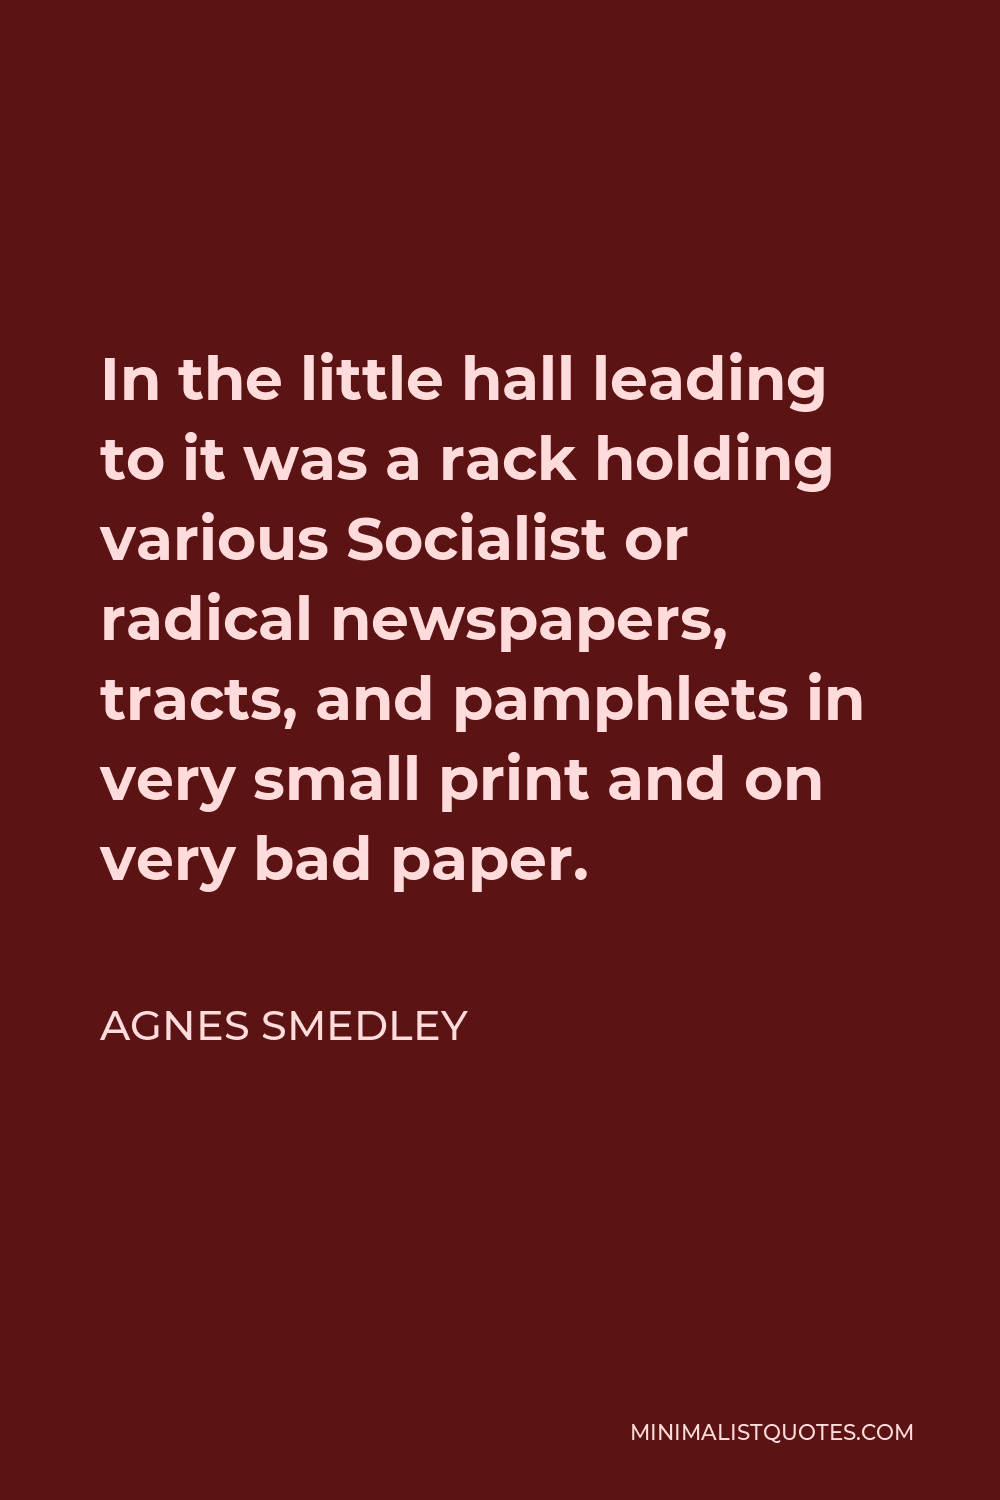 Agnes Smedley Quote - In the little hall leading to it was a rack holding various Socialist or radical newspapers, tracts, and pamphlets in very small print and on very bad paper.